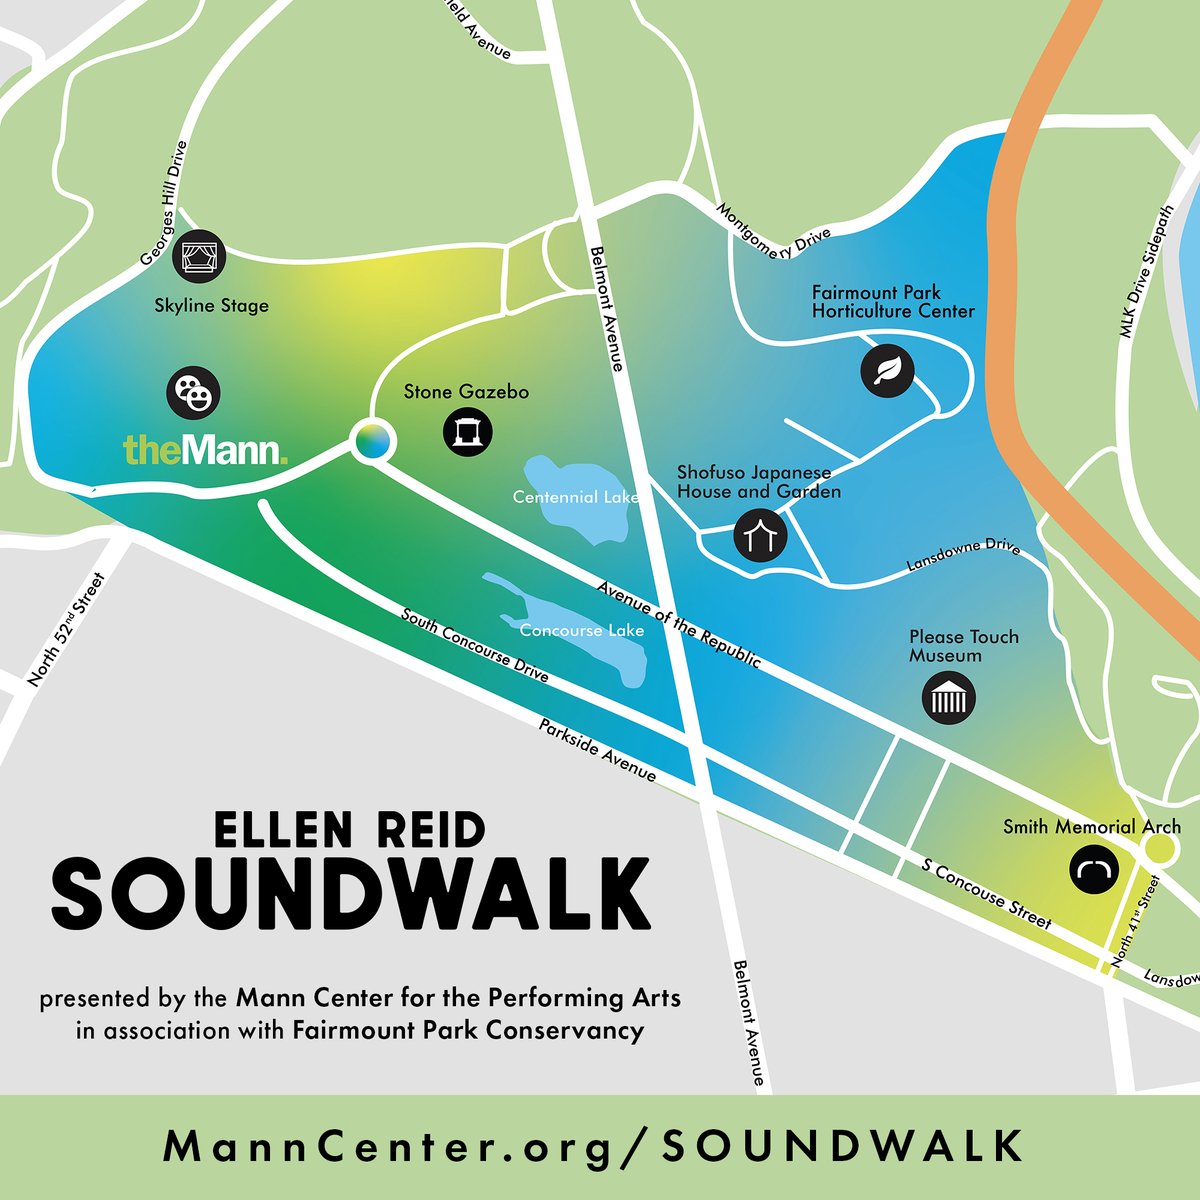 We've teamed up with @myphillypark for an interactive sound art installation: #EllenReidSoundwalk. Recorded by musicians of @philorch & the SOUNDWALK Ensemble, Ellen Reid's compositions were meticulously programmed for Fairmount Park and the Mann’s campus. MannCenter.org/SOUNDWALK